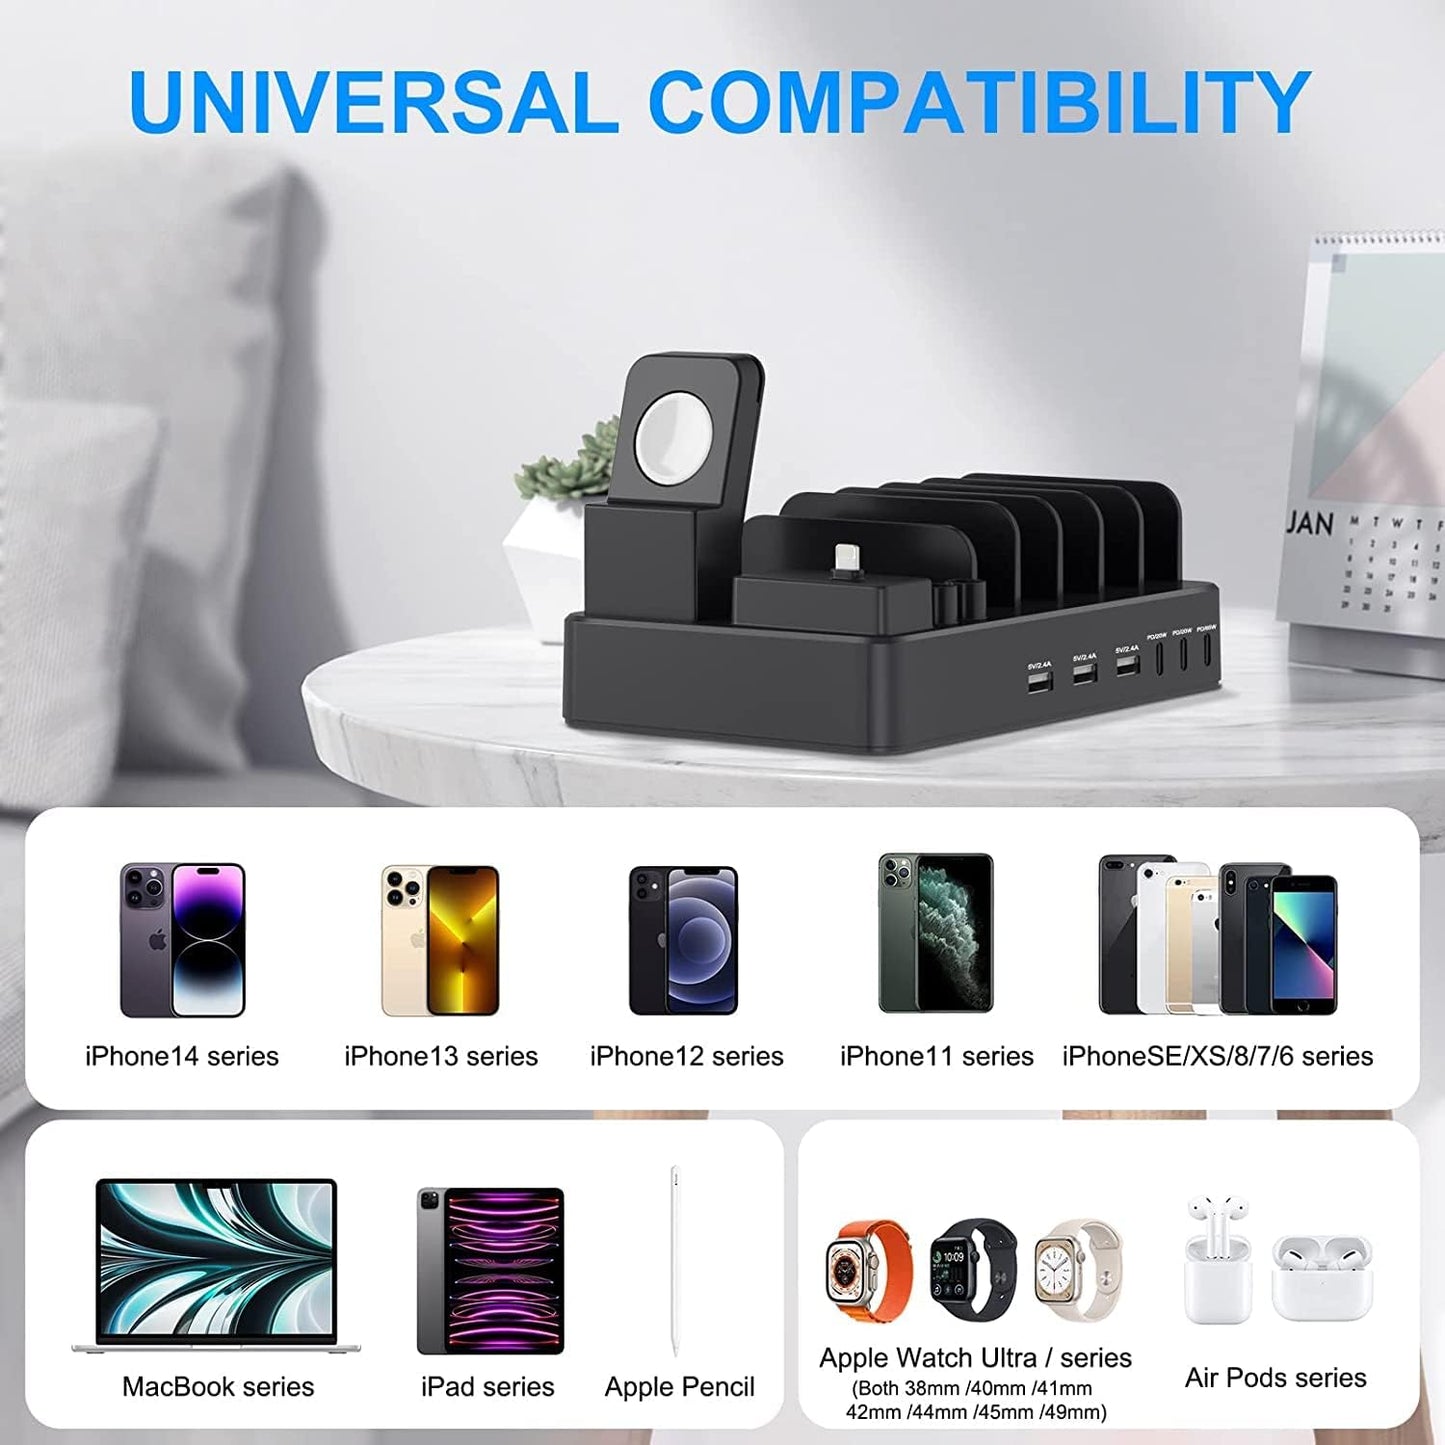 9-in-1 USB Charging Station with 185W Power Delivery, 65W Charger Port, Compatible for Multiple Devices including Laptops, Smartphones, Tablets & More